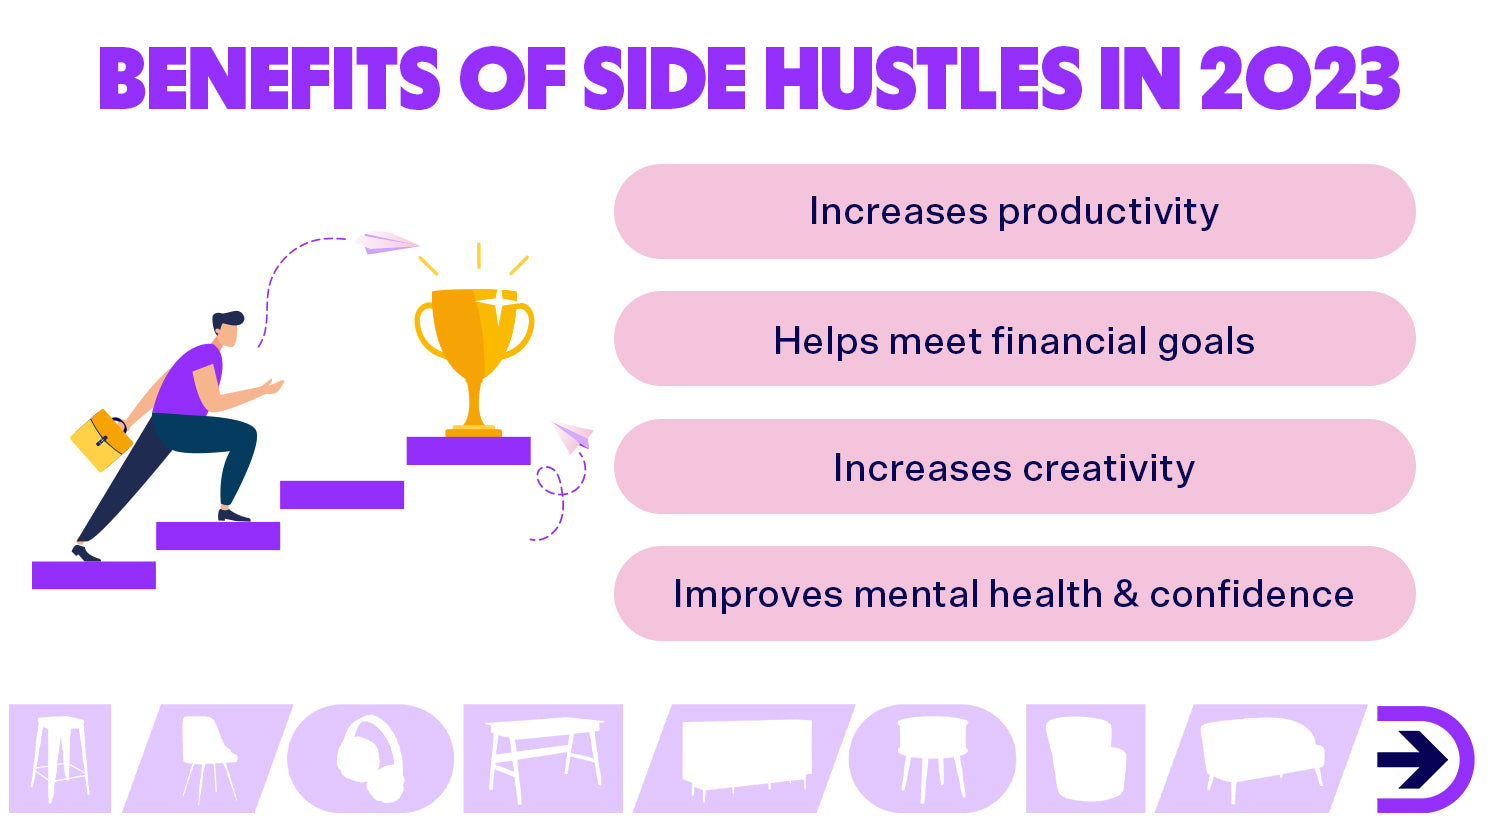 There are many positives to having a side hustle that aren't just the extra cash, including improvement in confidence and productivity.